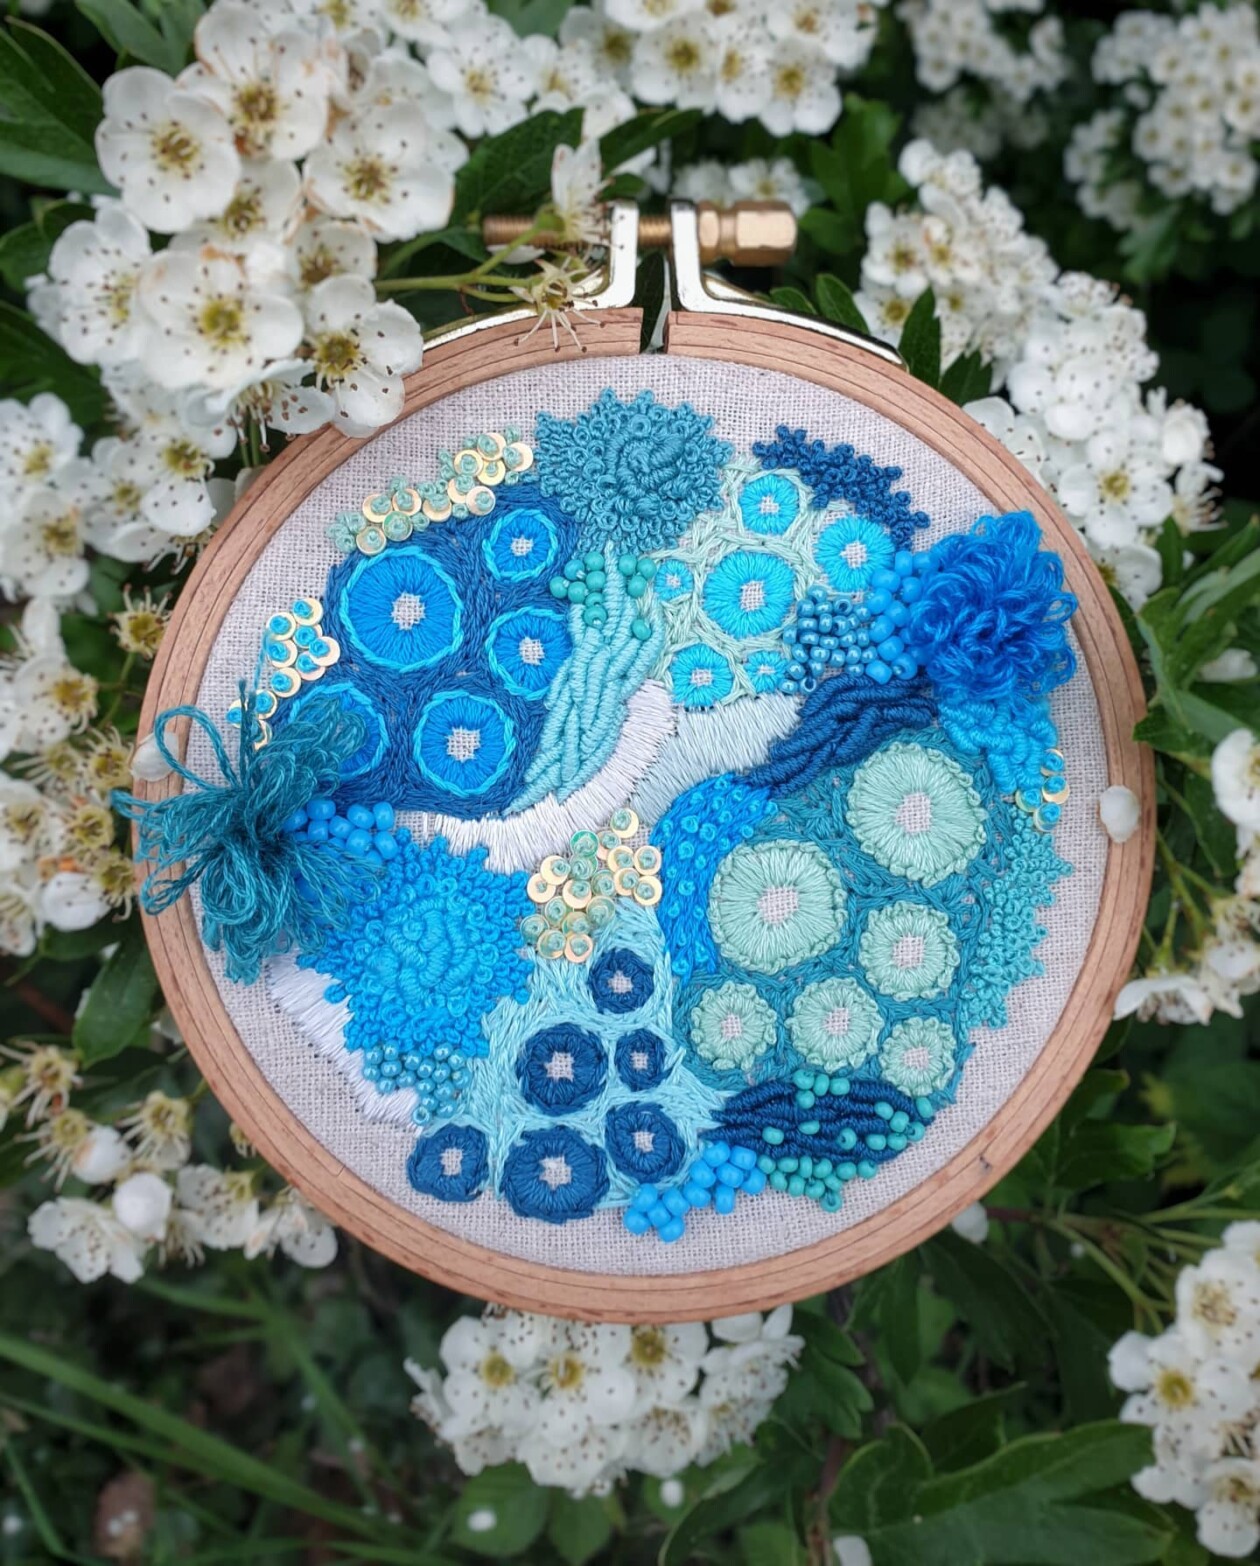 Marvelous Embroideries Inspired By Moss, Coral, And Lichen Forms By Hannah Kwasnycia (2)